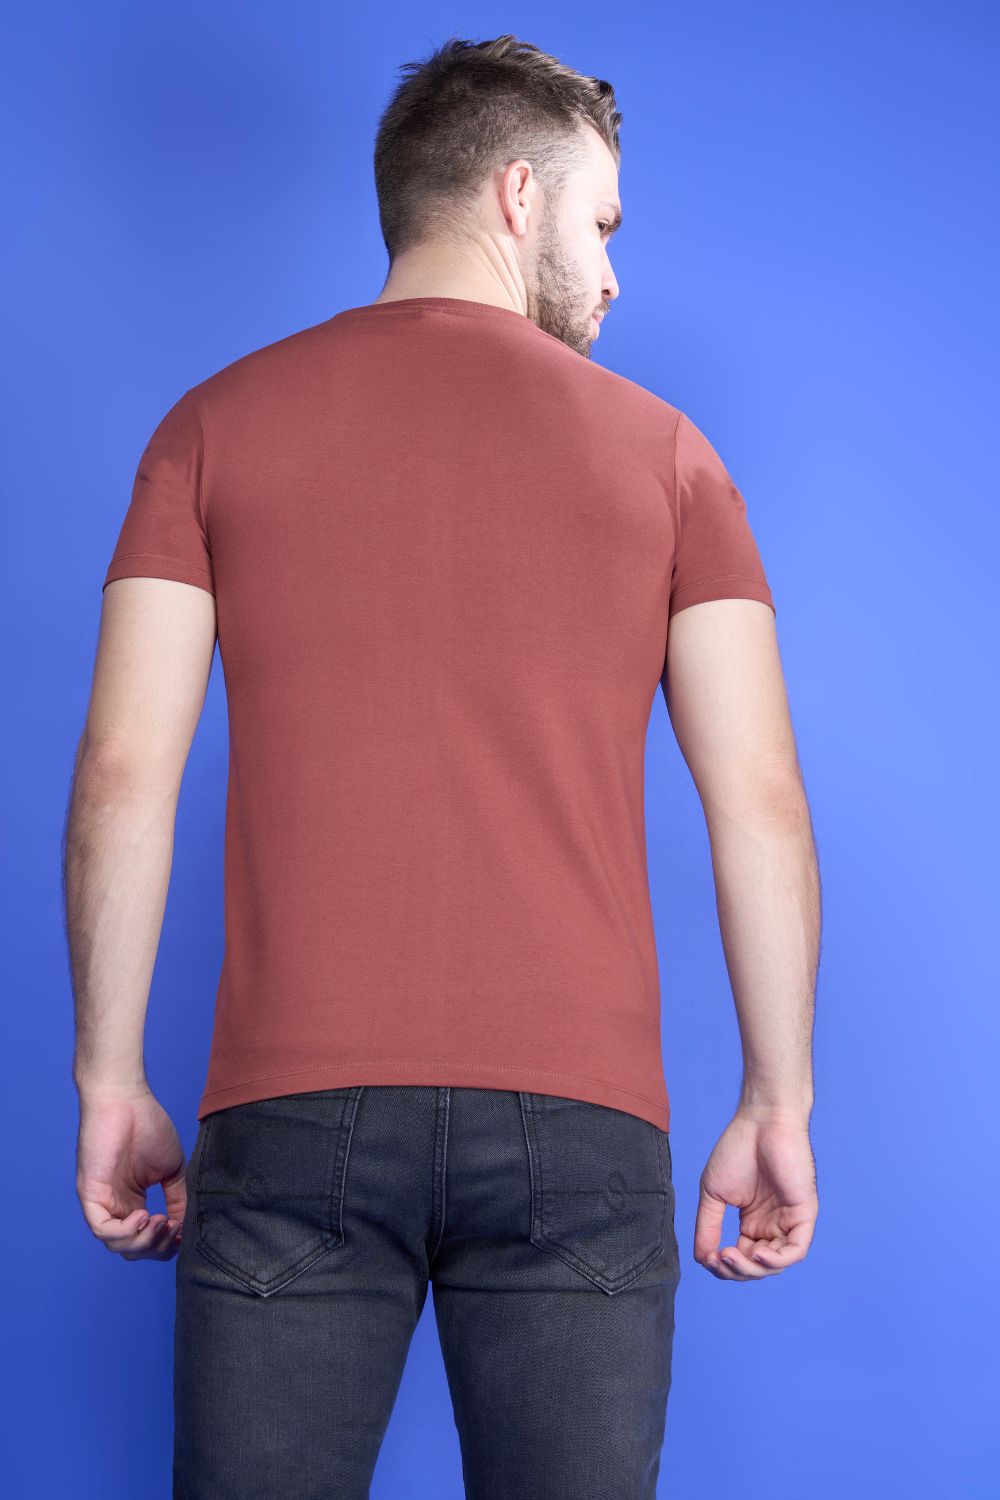 Teak colored, cotton Graphic T shirt for men, half sleeves and round neck, back view.